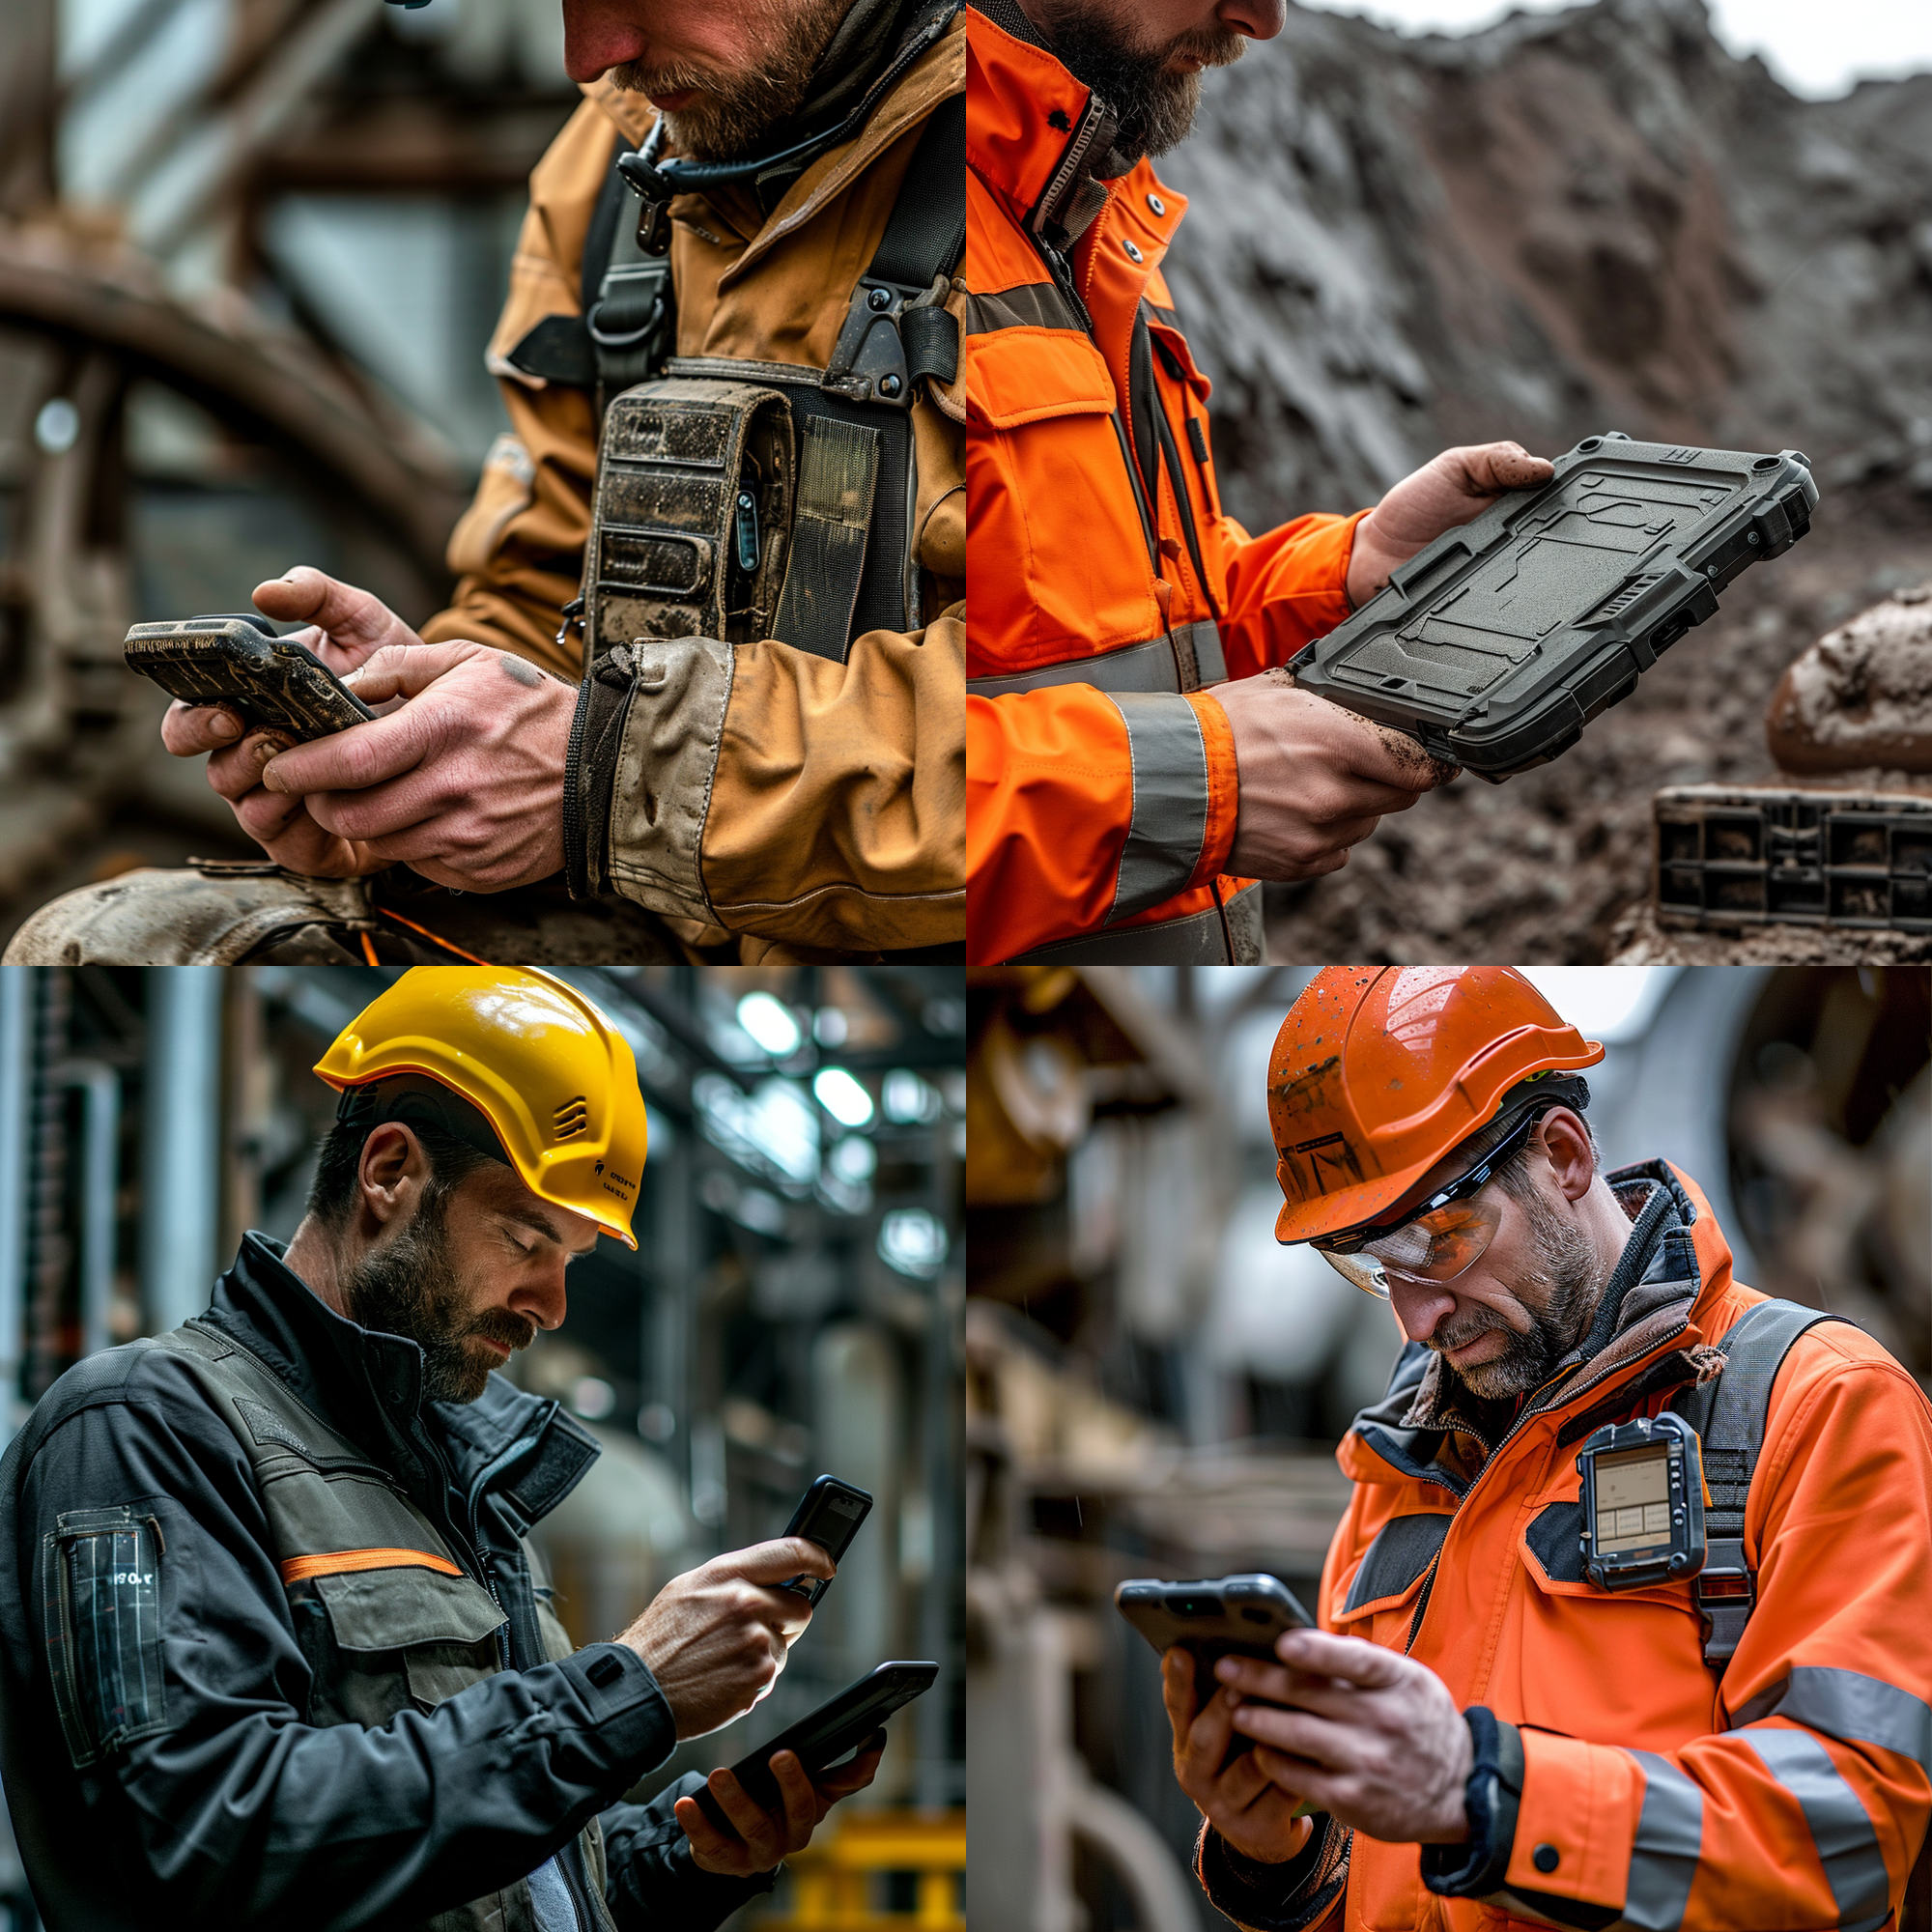 AGM Mobile's Rugged Devices: Essential Tools for Professionals in Demanding Fields